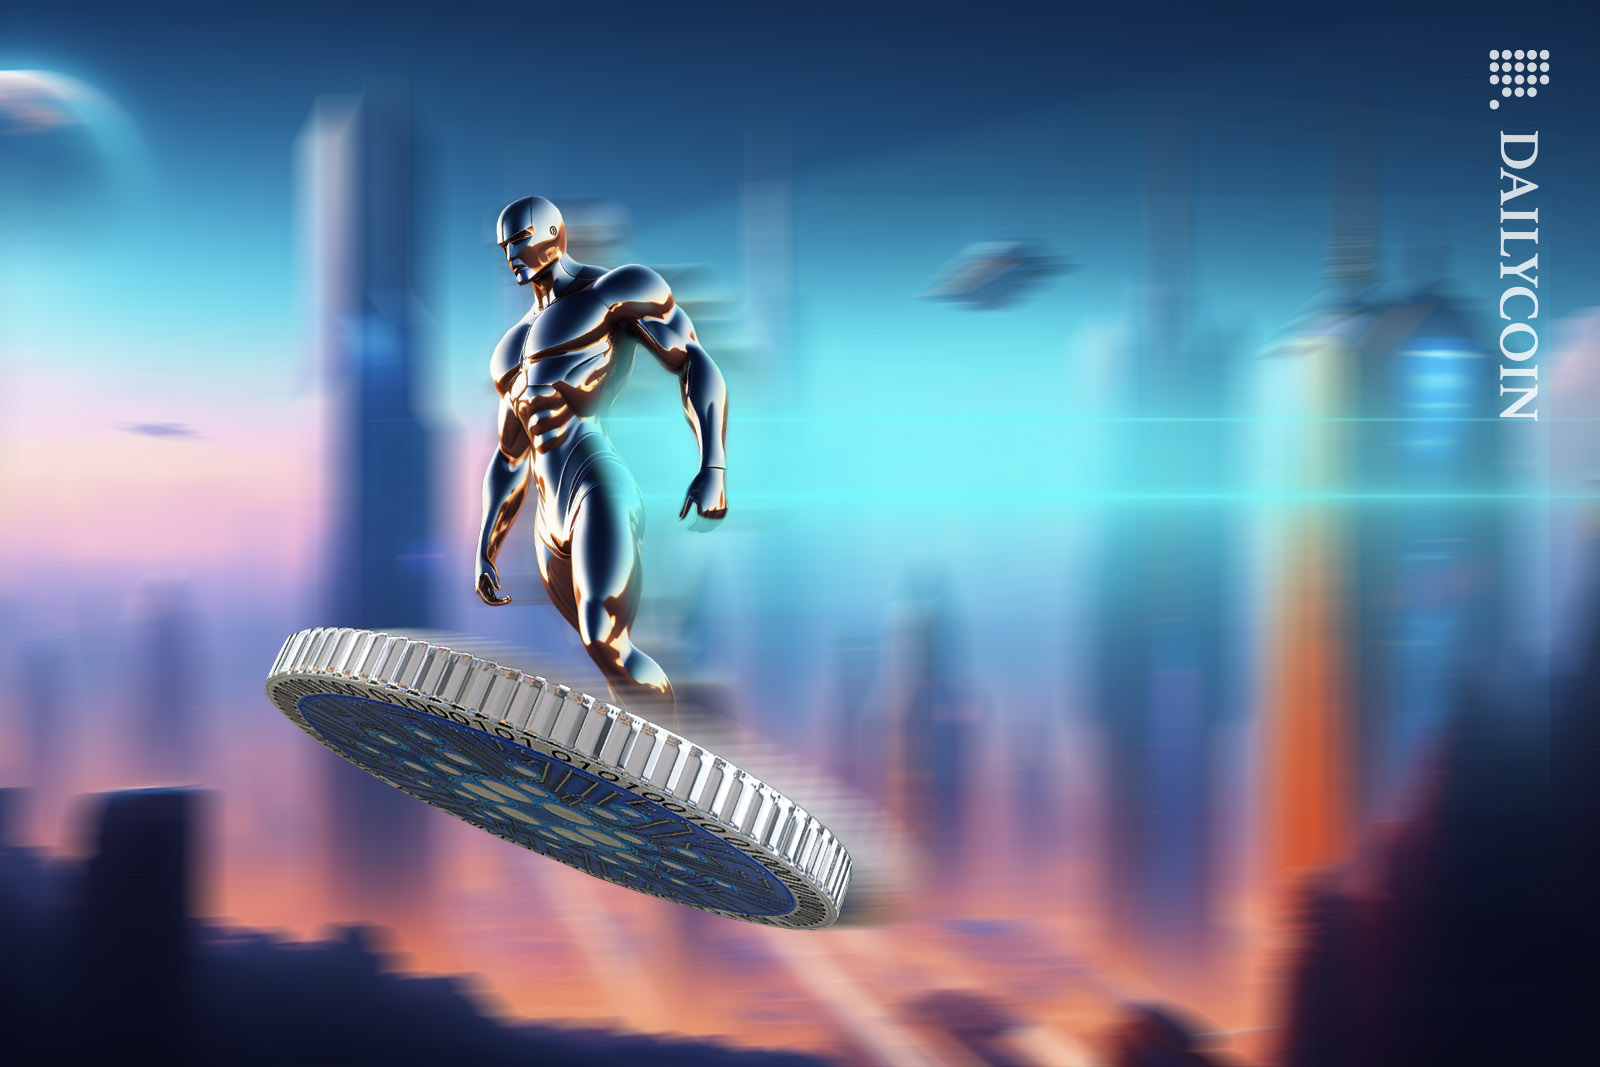 Superhero type figure surfing on a Cardano coin over a futuristic city with high speed.